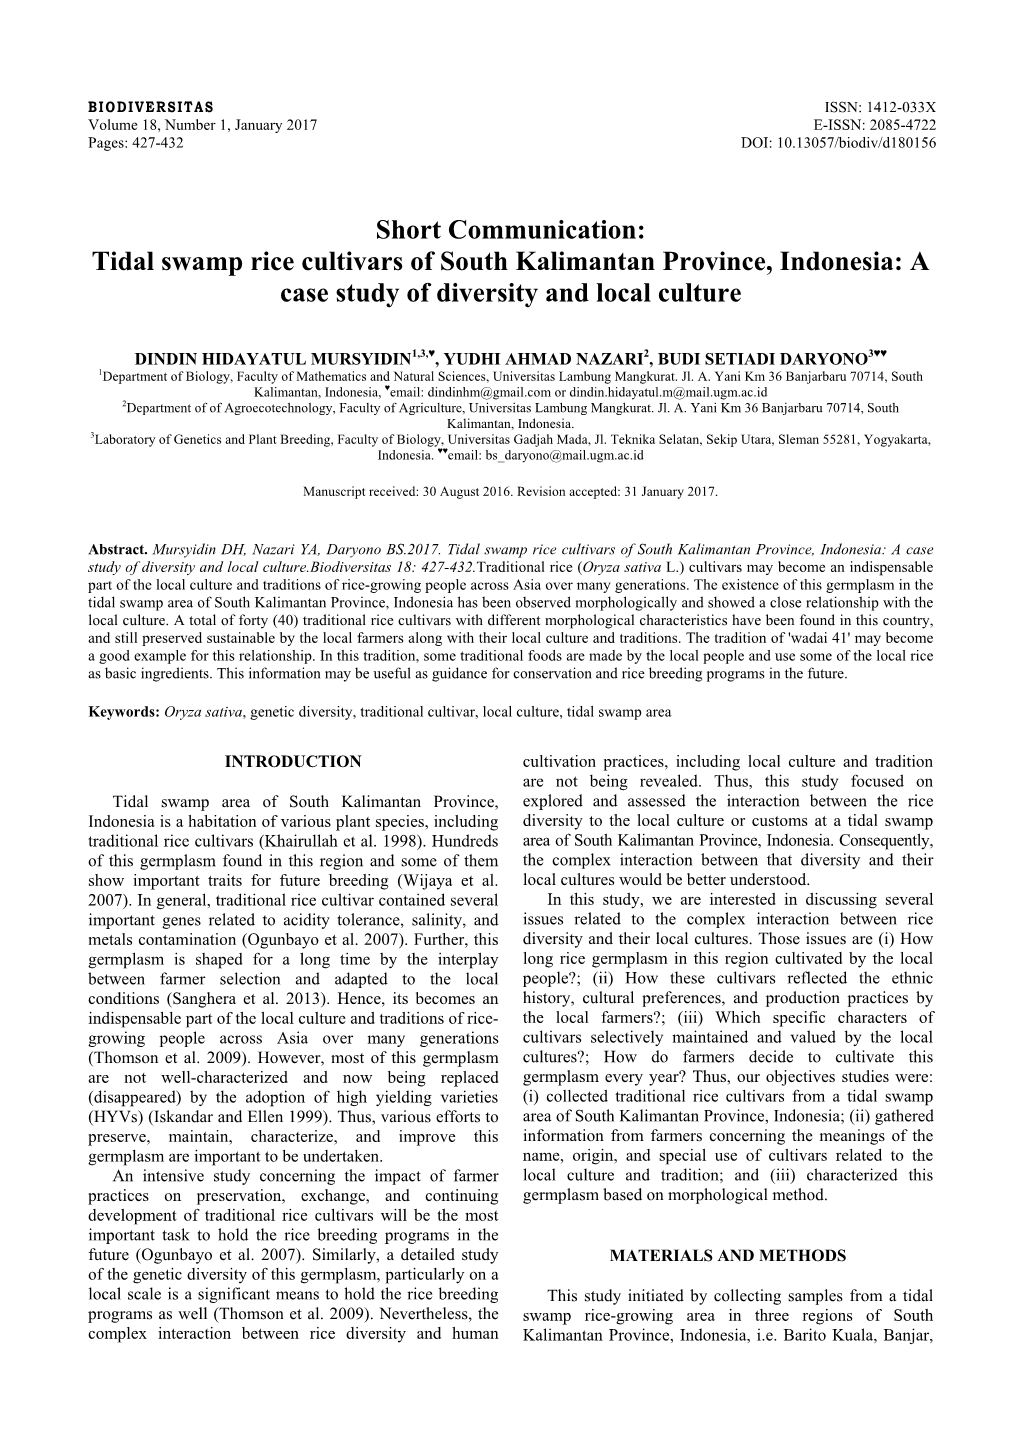 Tidal Swamp Rice Cultivars of South Kalimantan Province, Indonesia: a Case Study of Diversity and Local Culture